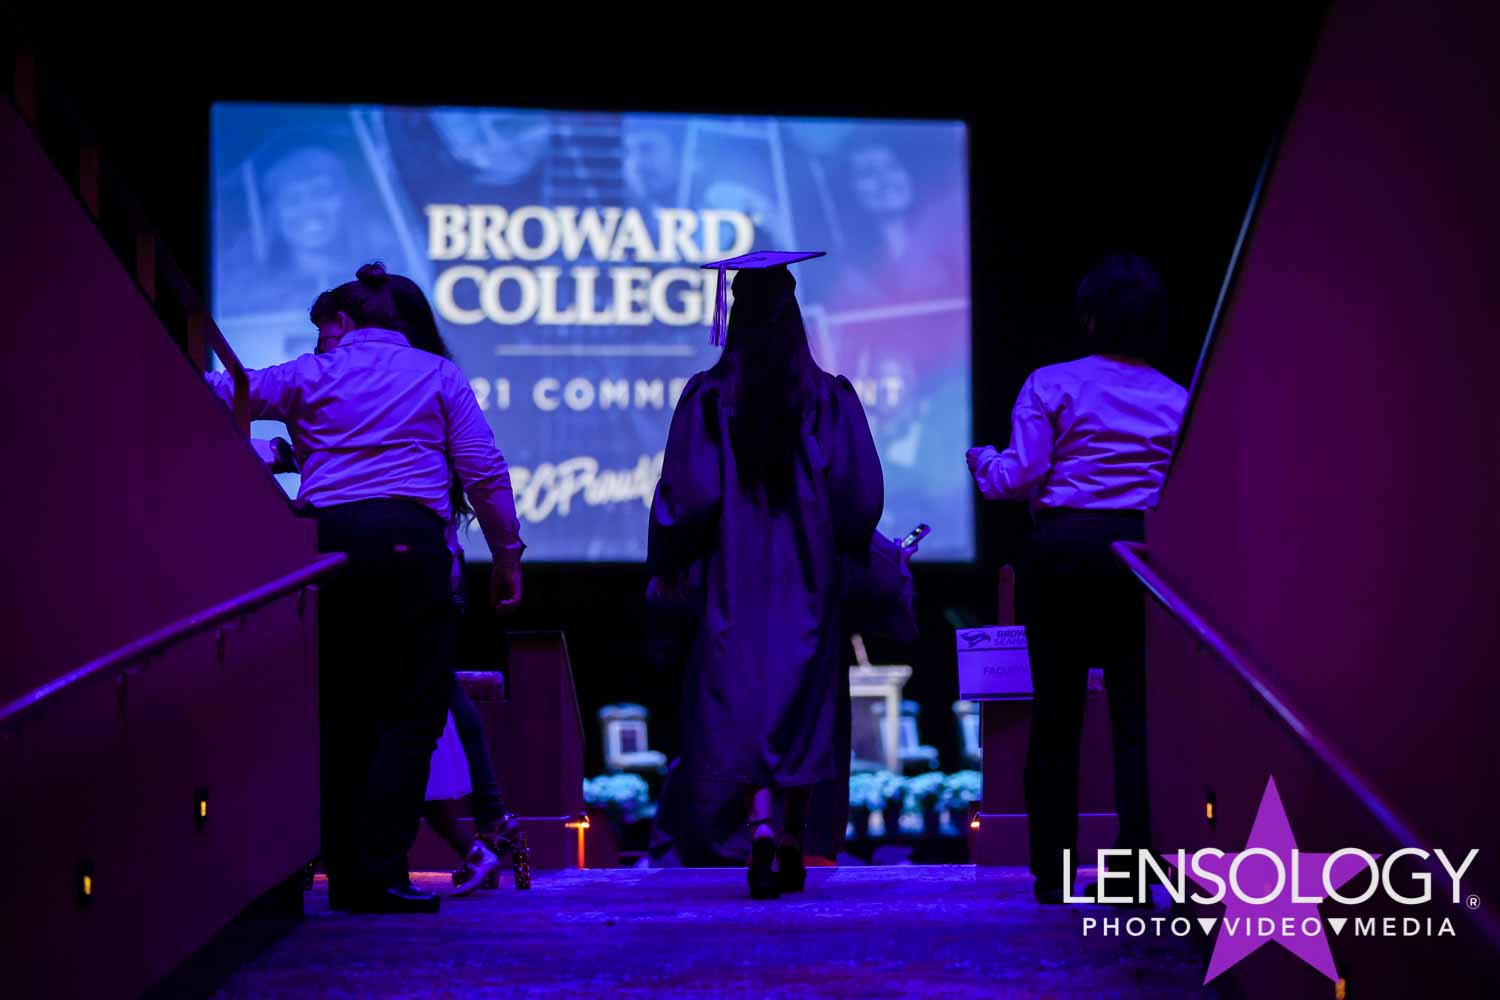 LENSOLOGY.NET - Broward college graduation, roving photographer at Hard Rock Casino, Fort Lauderdale, FL.
All images are copyright of Lensology.net
Email: info@lensology.net
www.lensology.net